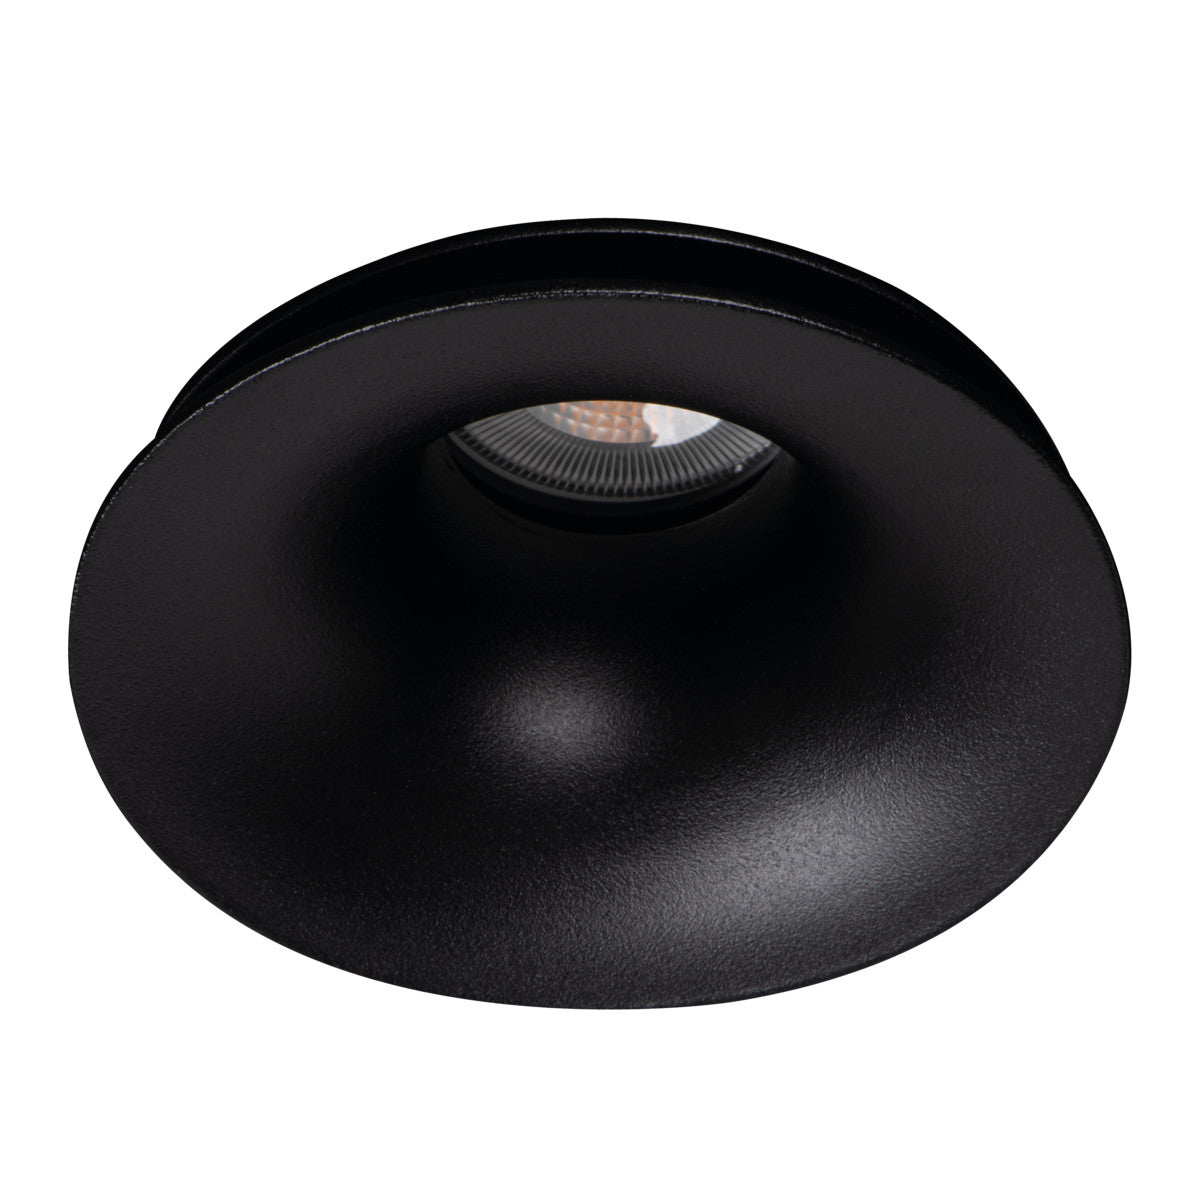 Kanlux AJAS Round Recessed Ceiling Mounted GU10 240V Spotlight Down Light Fitting